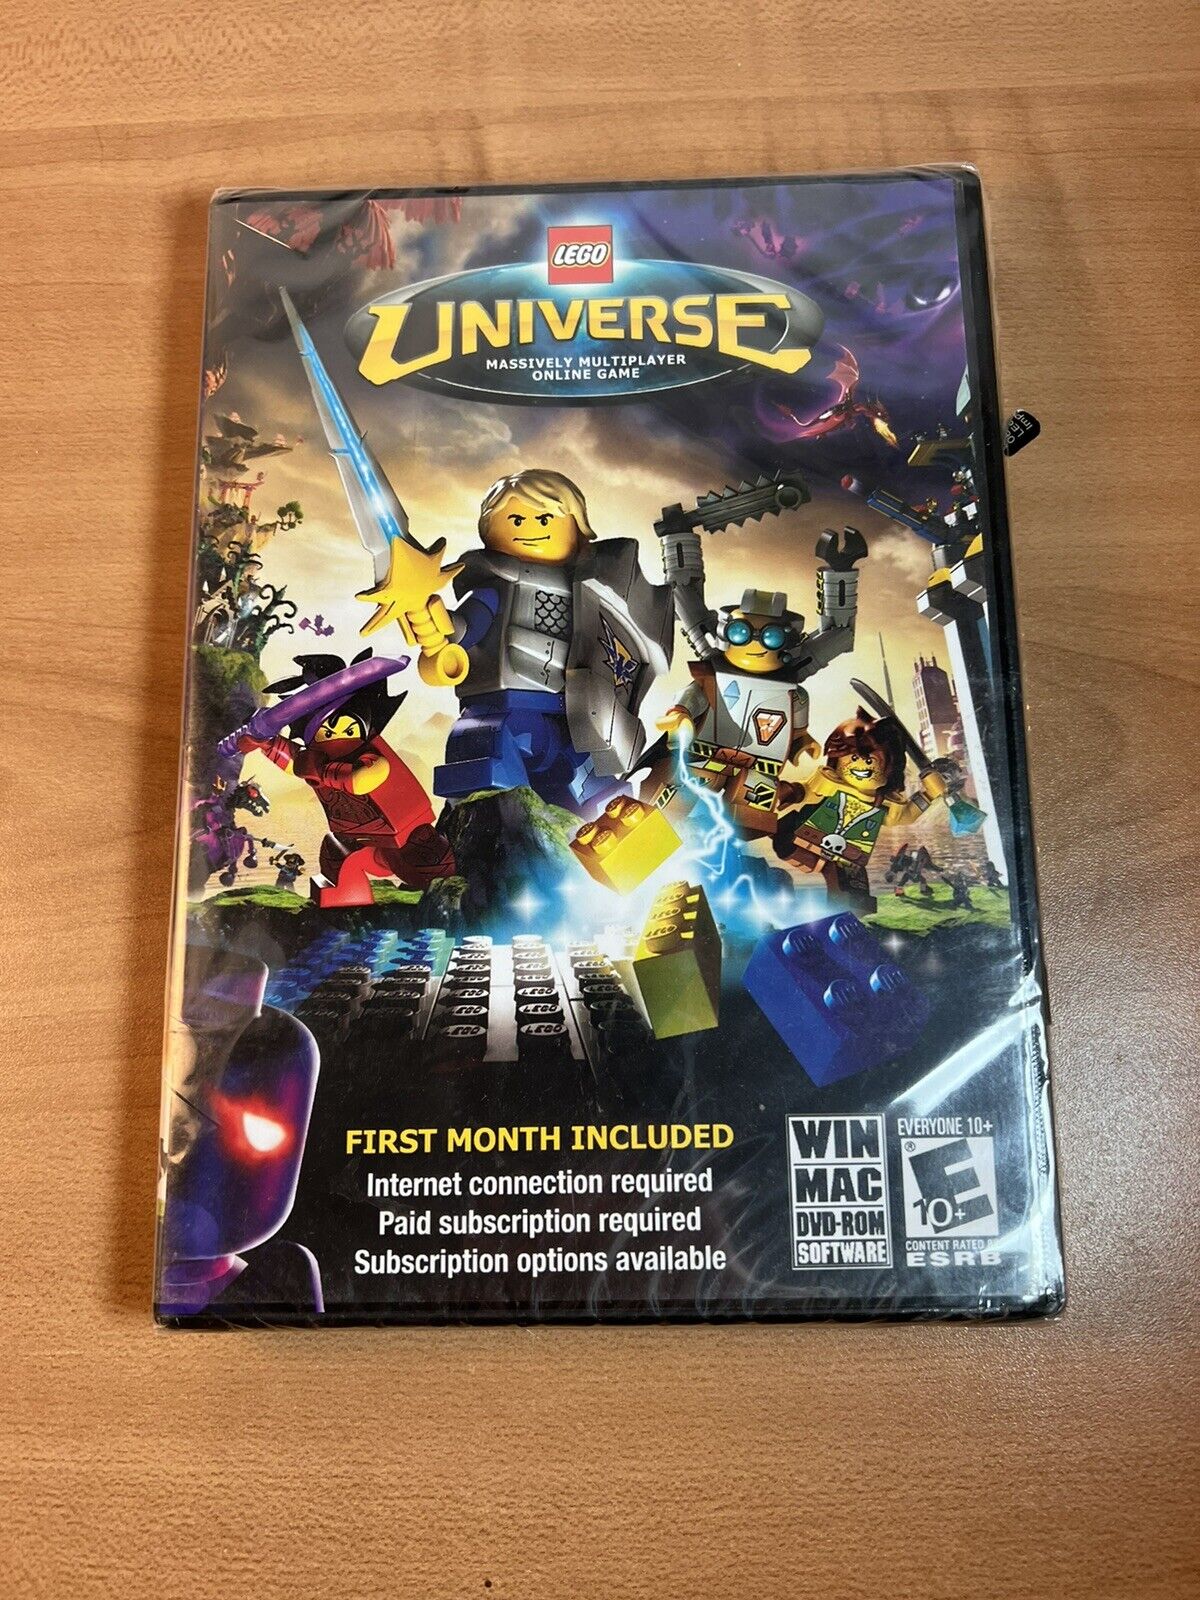 LEGO UNIVERSE: Massively Multiplayer Online Game Brand New Sealed MMO Game PC